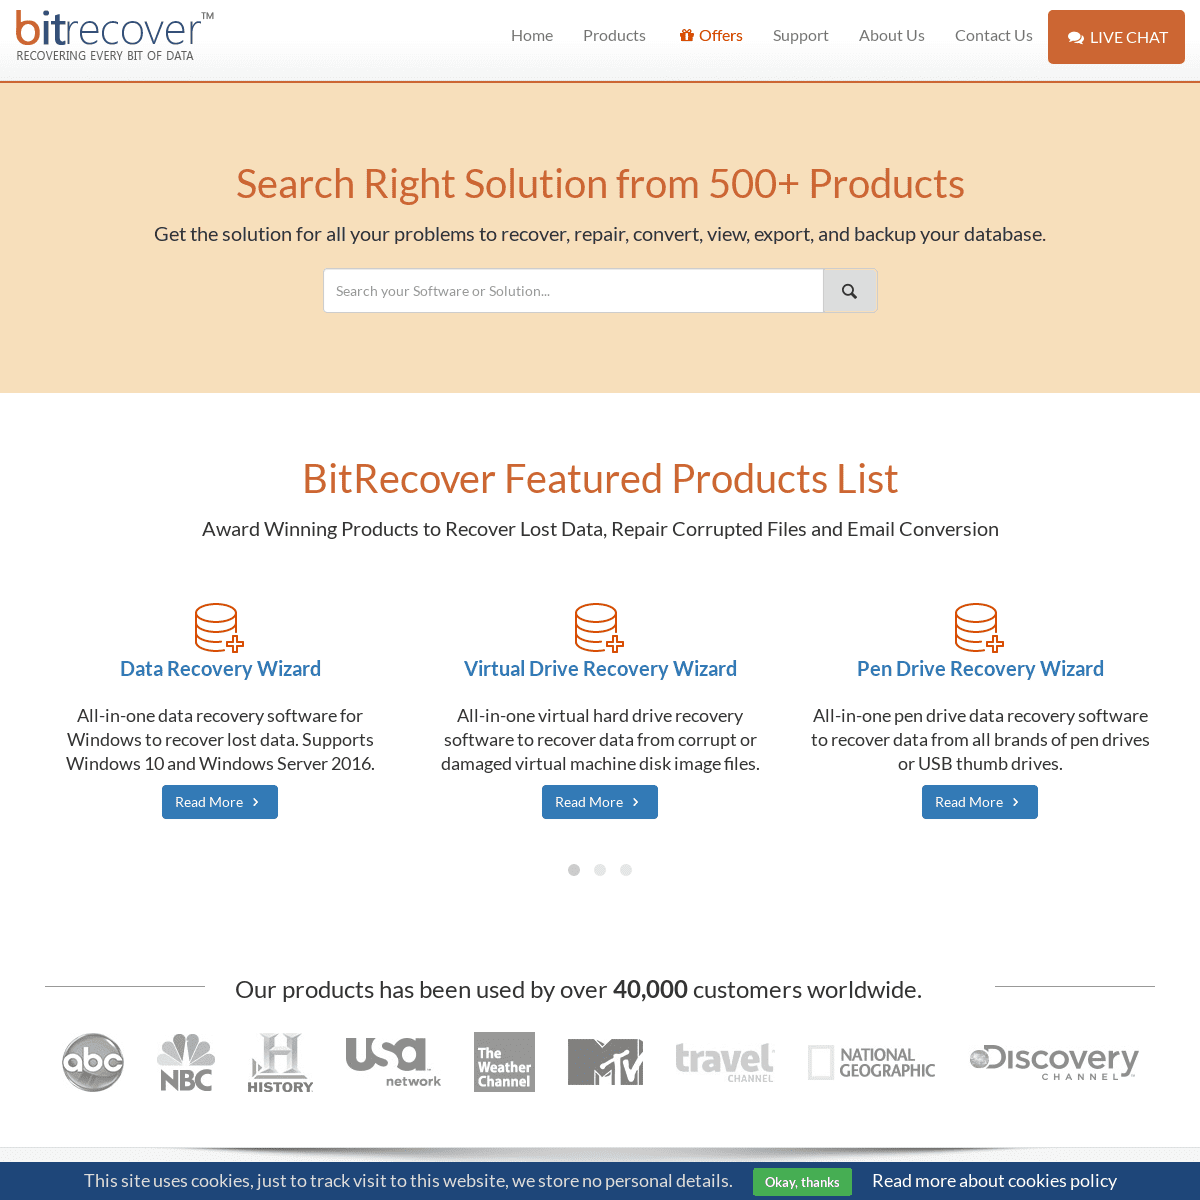 A complete backup of bitrecover.com